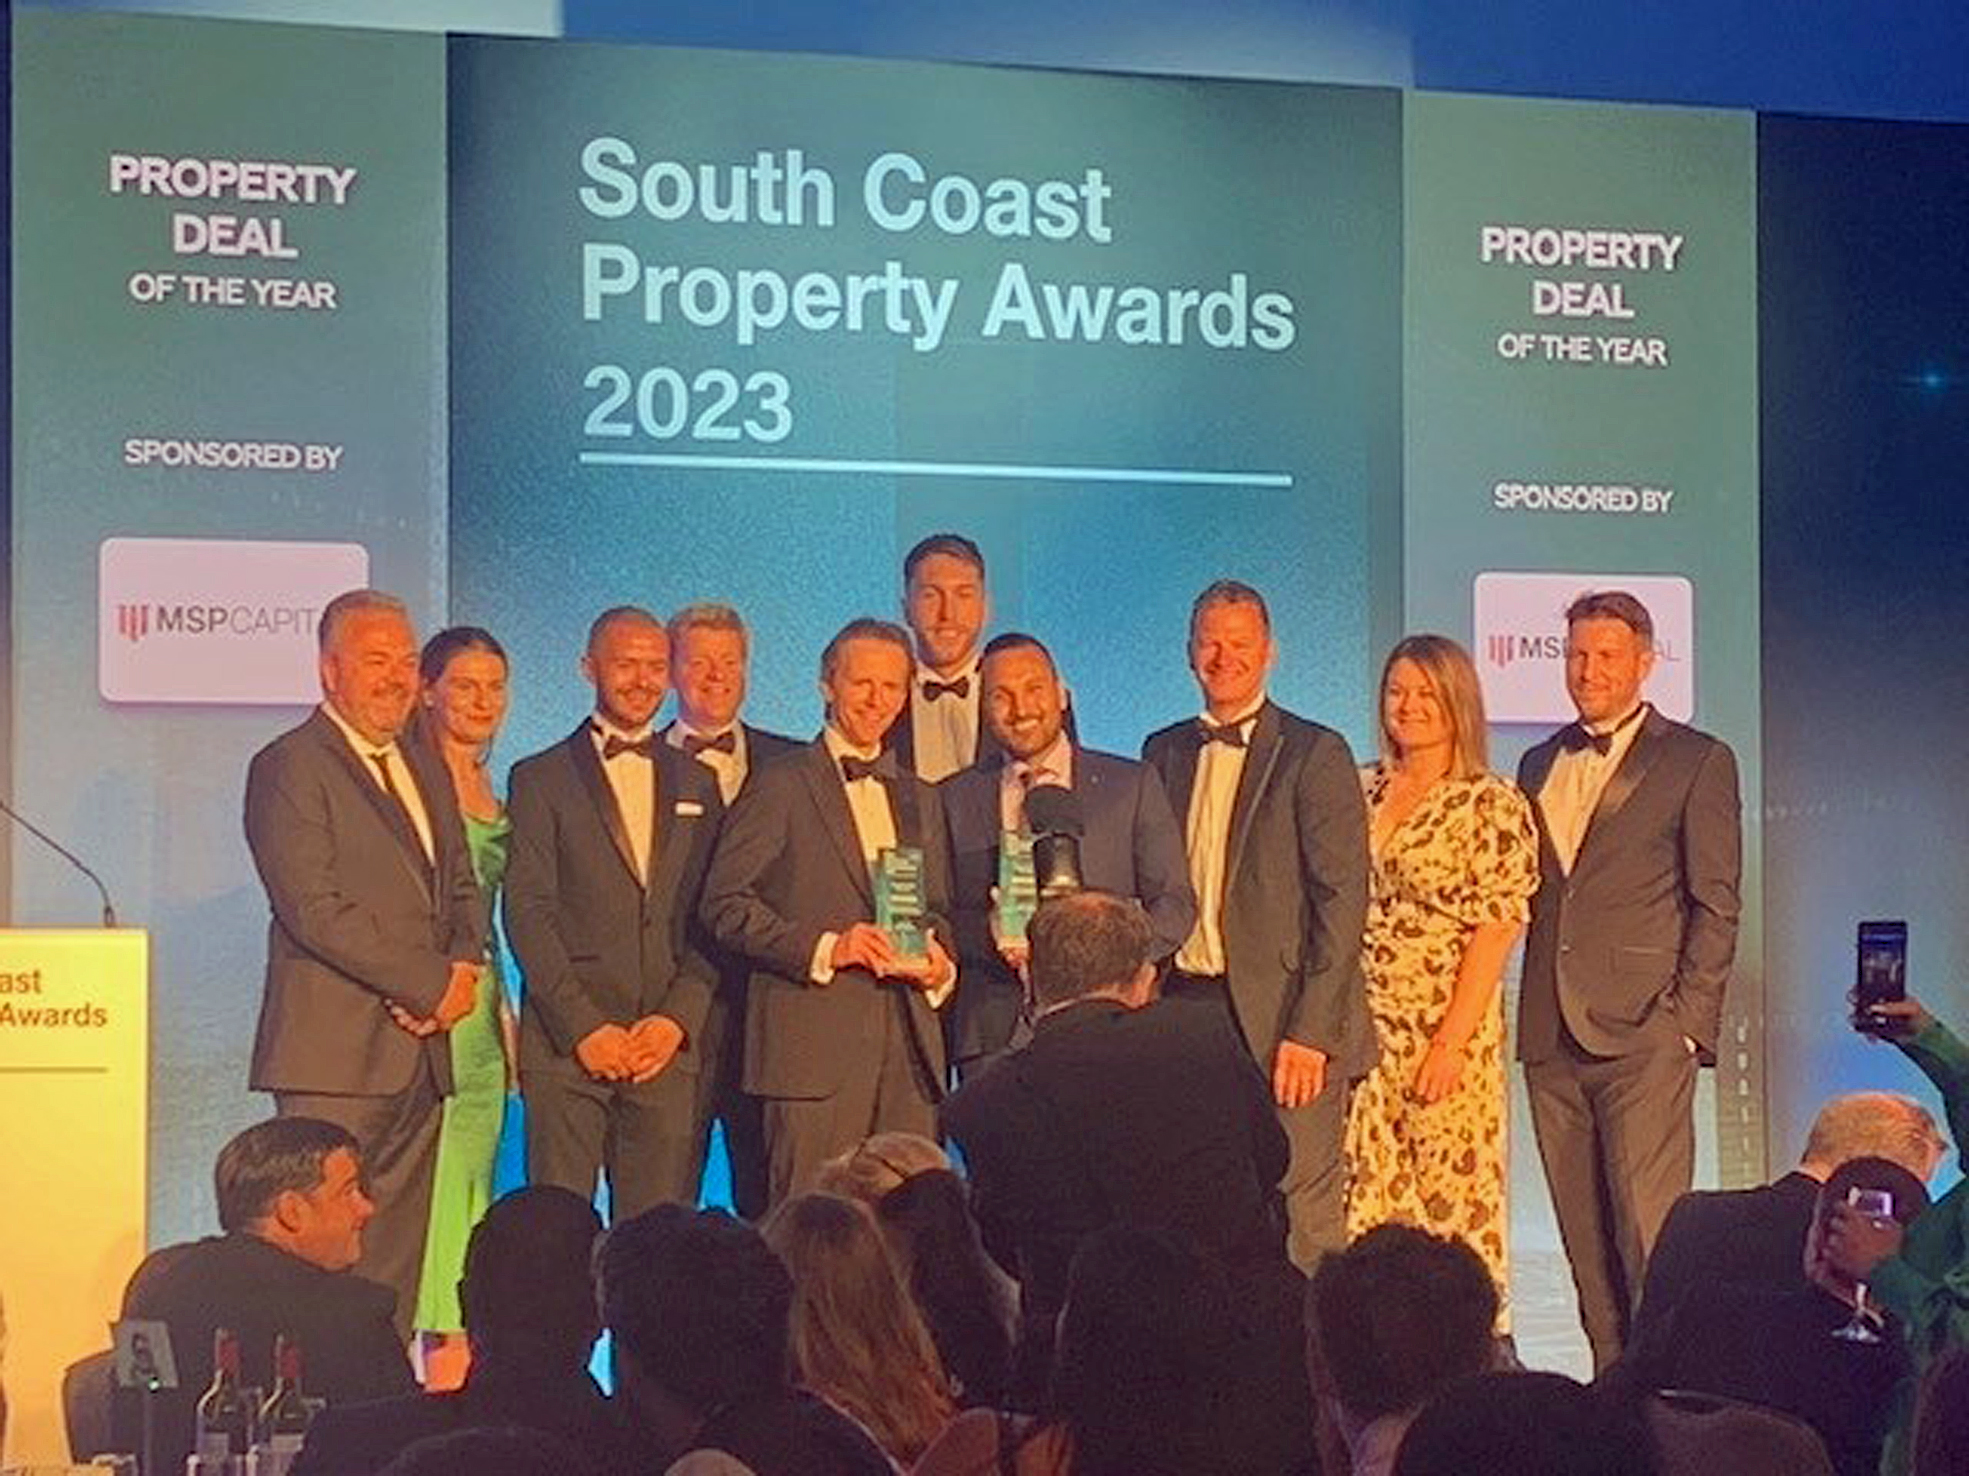 Awards hat-trick for second consecutive year for the property consultancy